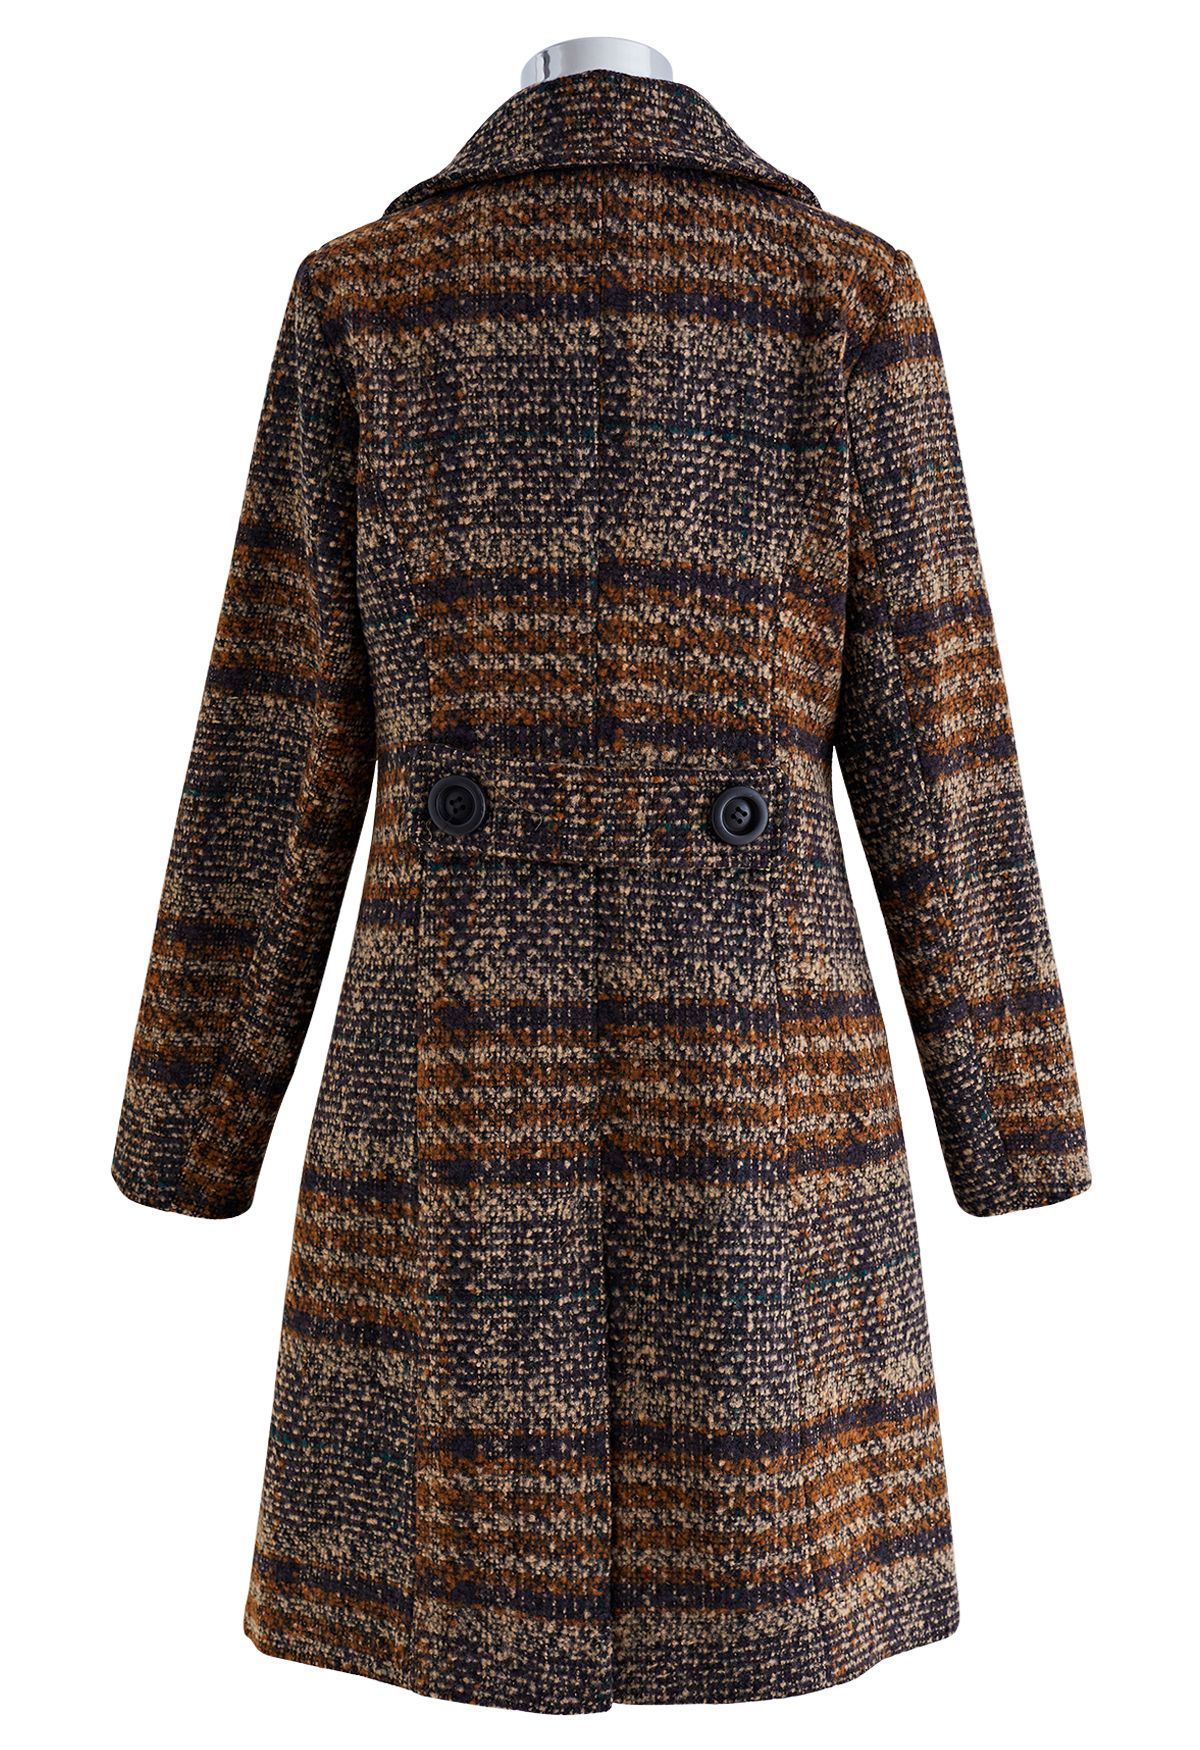 Retro Plaid Double-Breasted Wool-Blend Coat in Brown